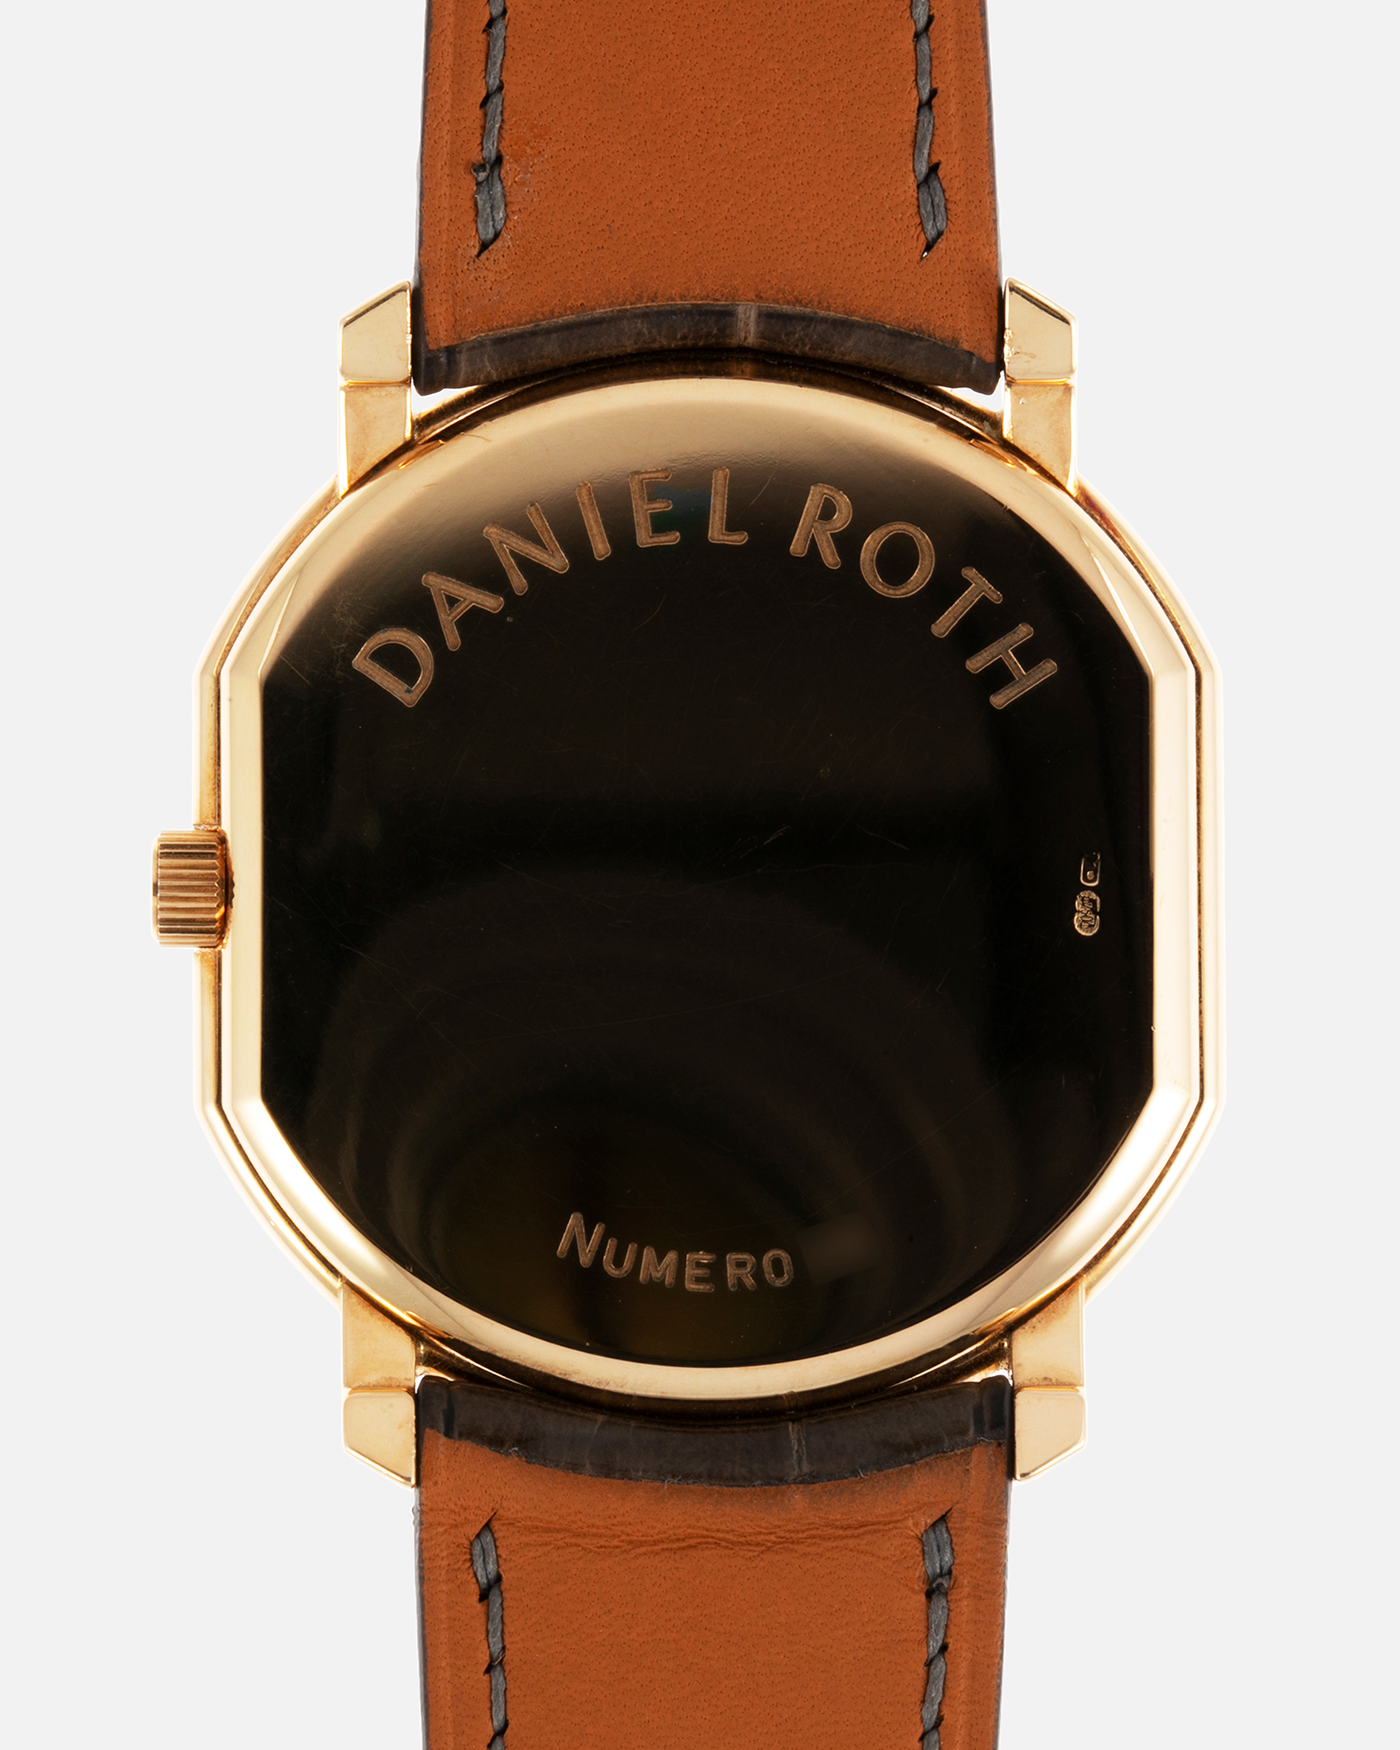 Brand: Daniel Roth Year: 1990’s Model: 2107 Material: 18k Yellow Gold Movement: Frederic Piguet Cal. 71 Case Diameter: 35mm X 38mm Strap: Custom made Chestnut Brown Alligator Strap with 18k Yellow Gold Tang Buckle